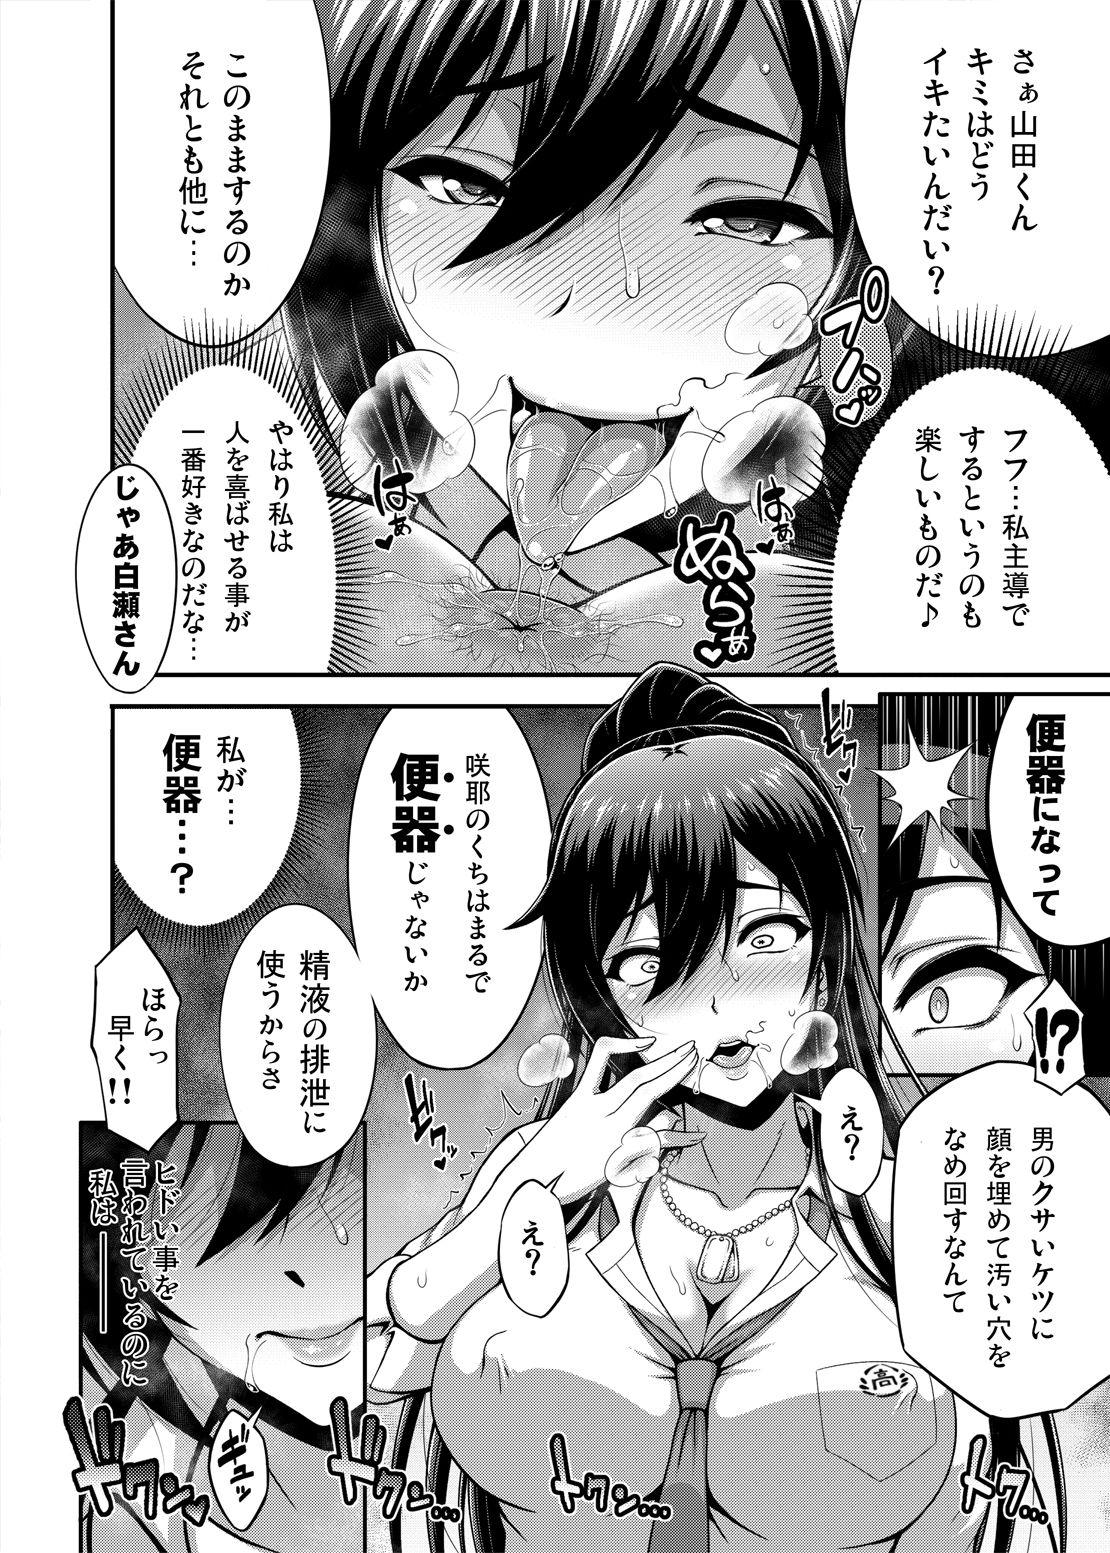 Mature Woman SSR 3 - The idolmaster Groupsex - Page 3